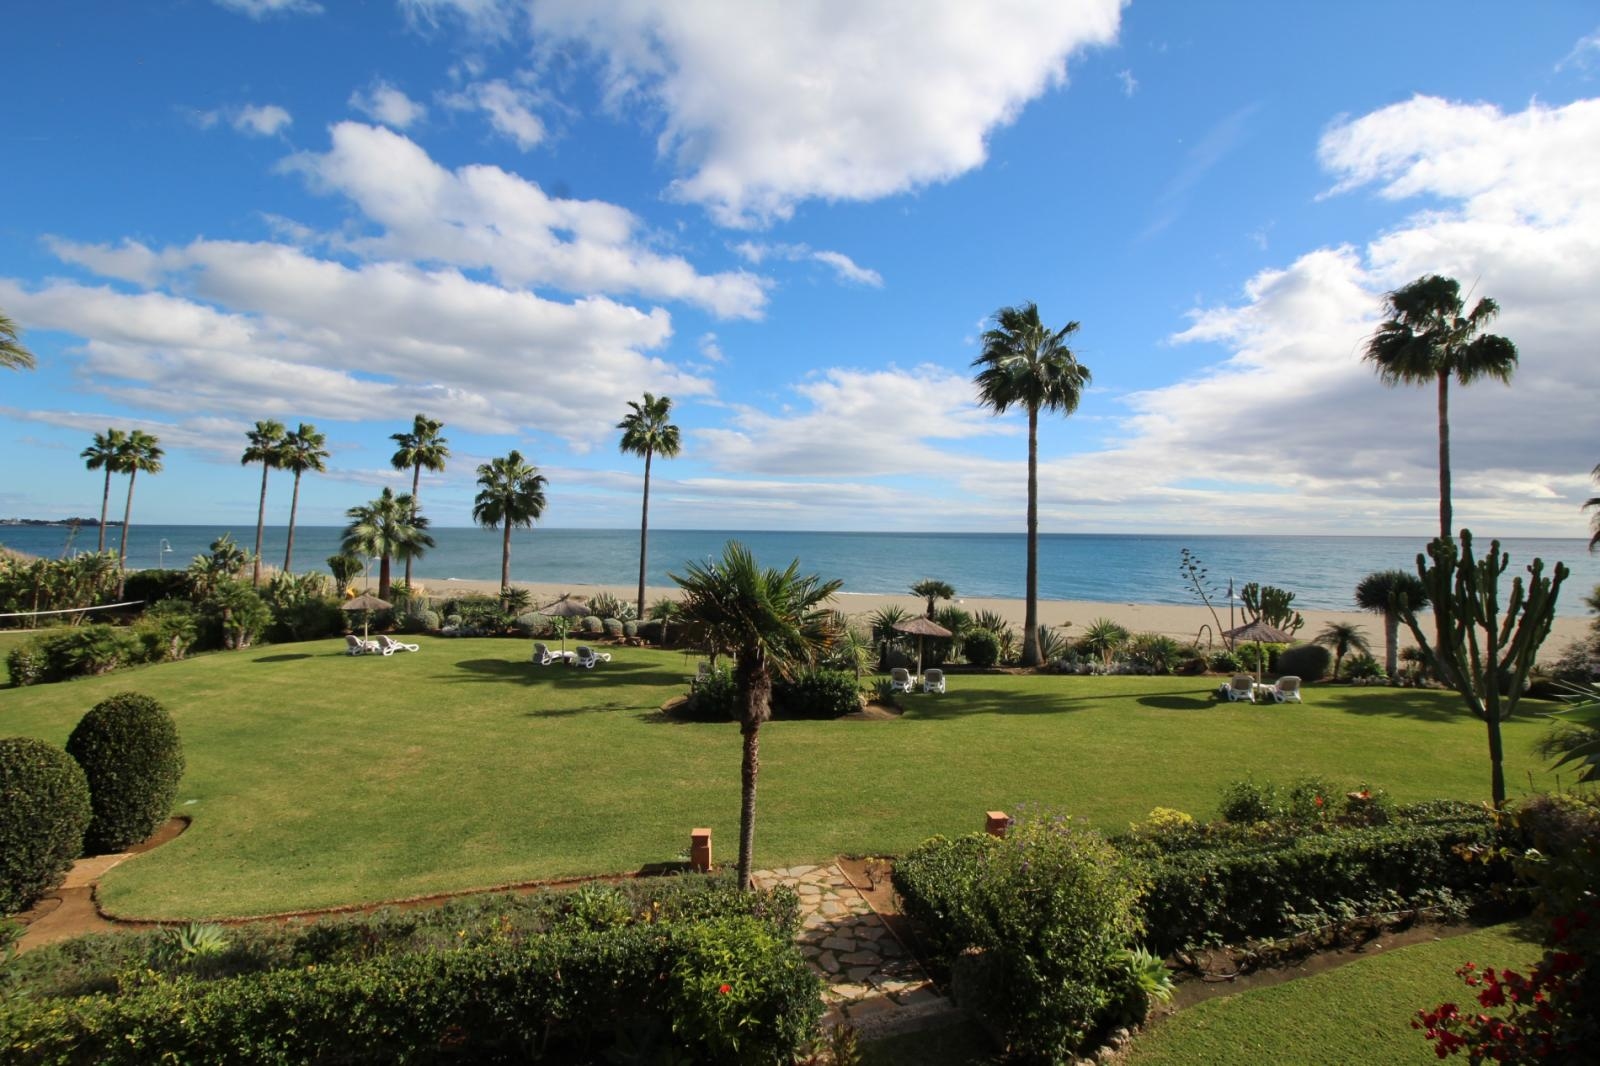 SOLD! SPECTACULAR PENTHOUSE ON THE BEACHFRONT, LOCATED IN COSTALITA - MARBELLA